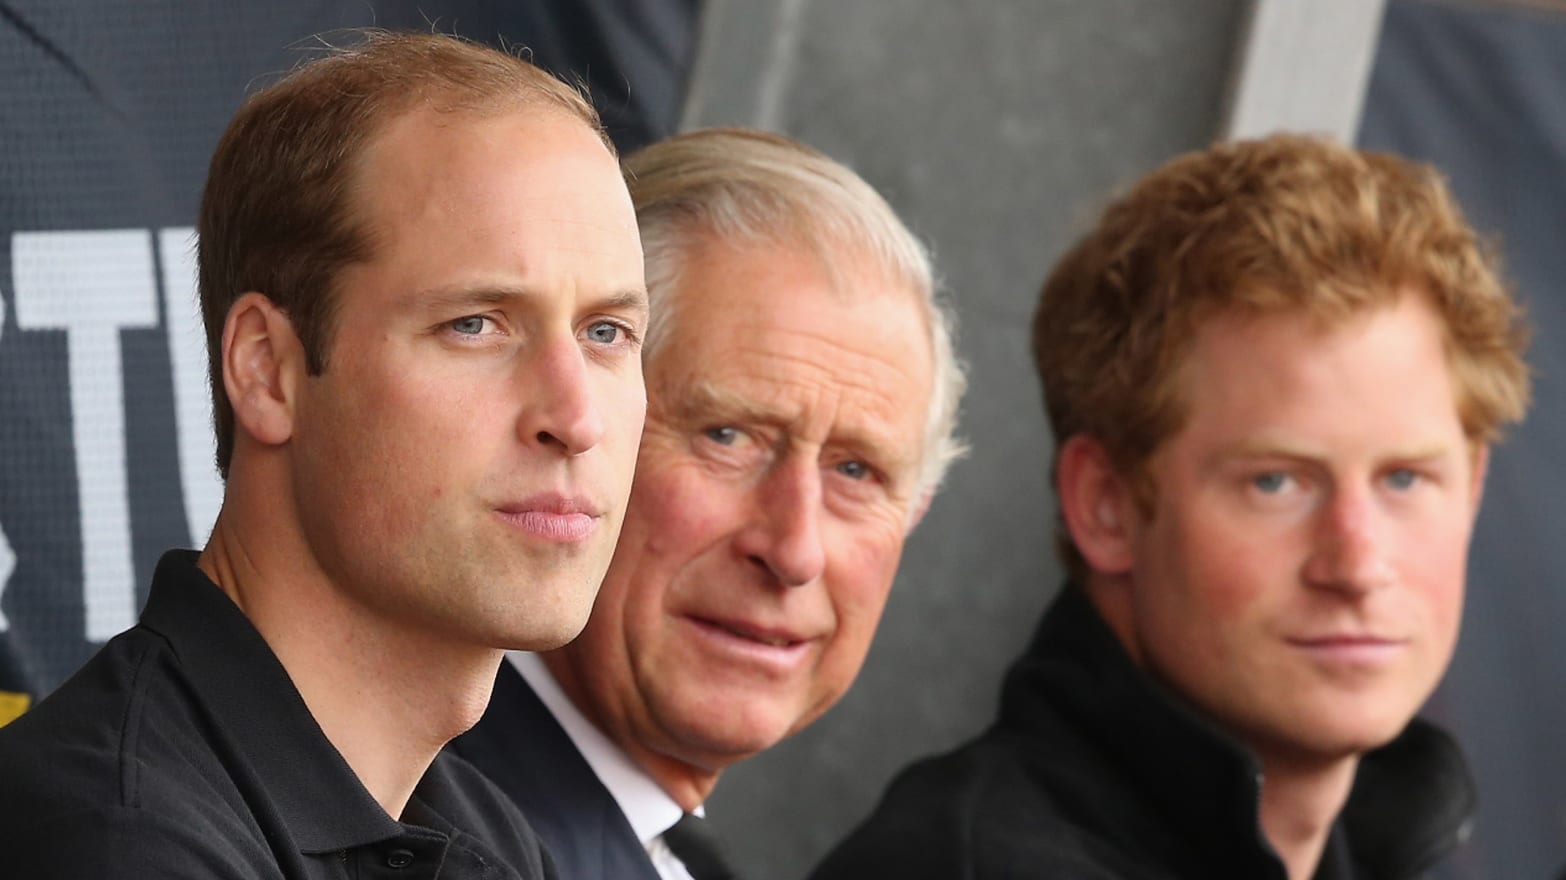 Royal Family LIVE: William 'still waiting' for an olive branch apology from Harry